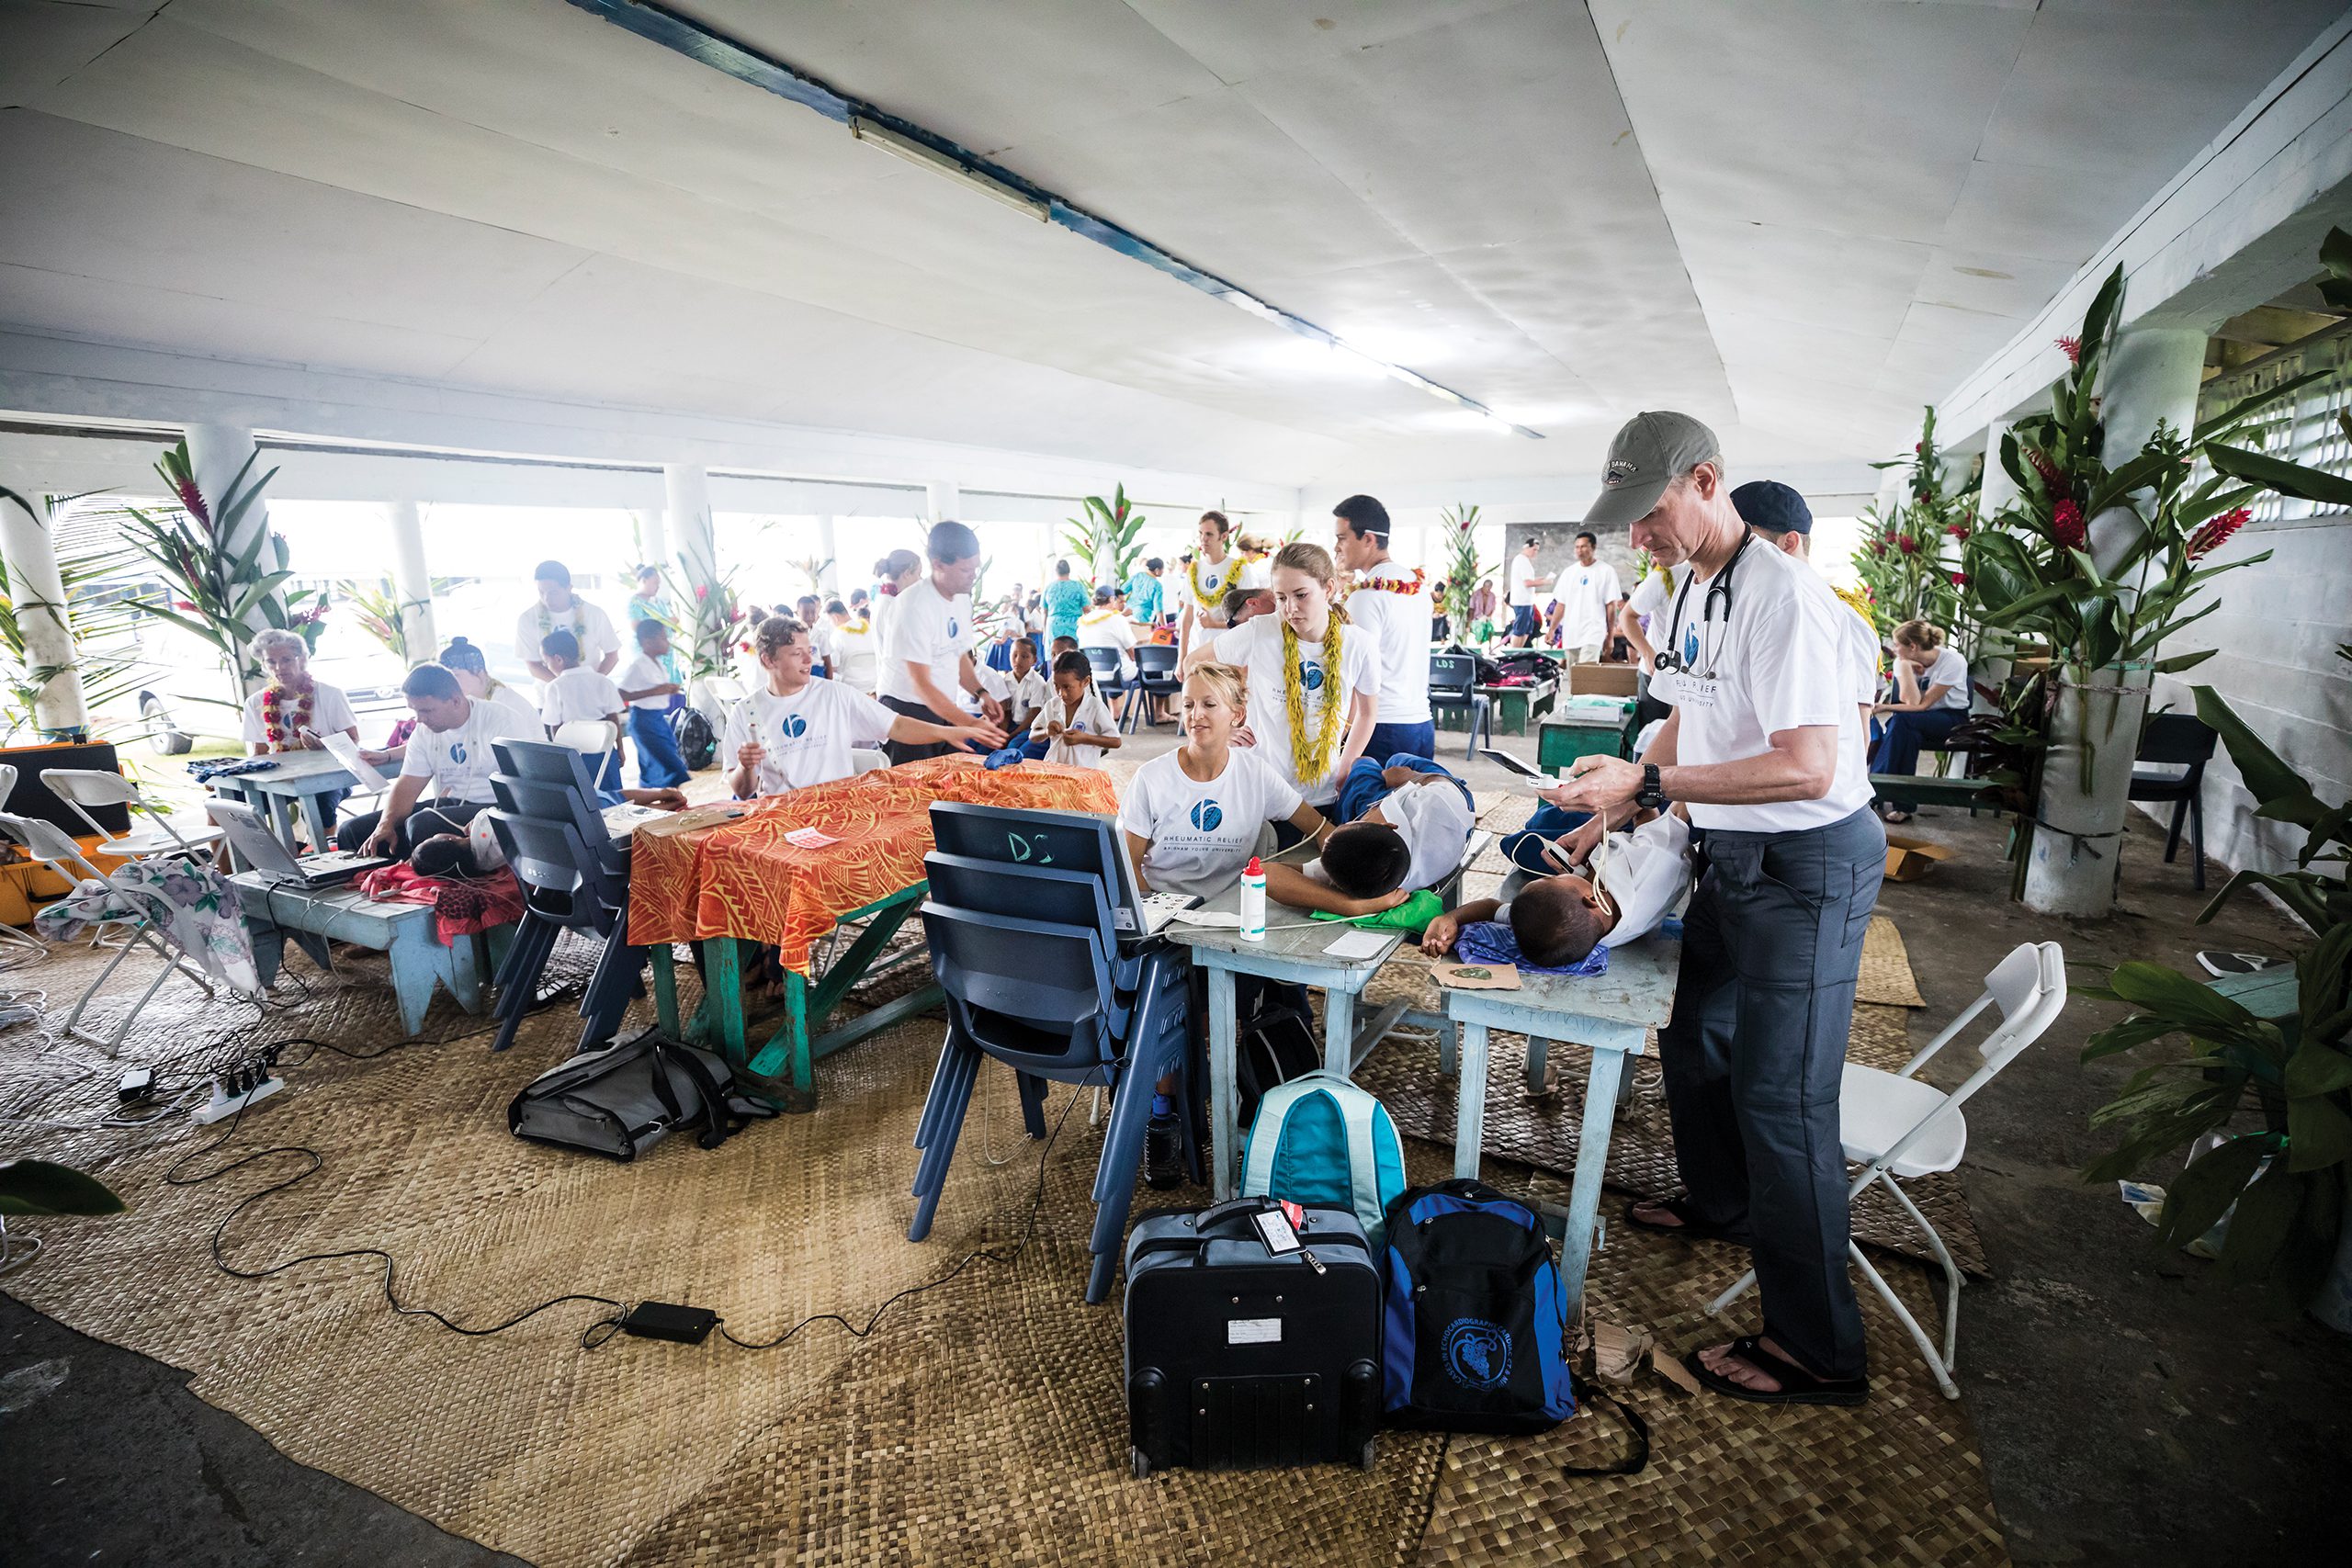 The Rheumatic Relief team conducting heart screenings with Samoan children laying on desks.